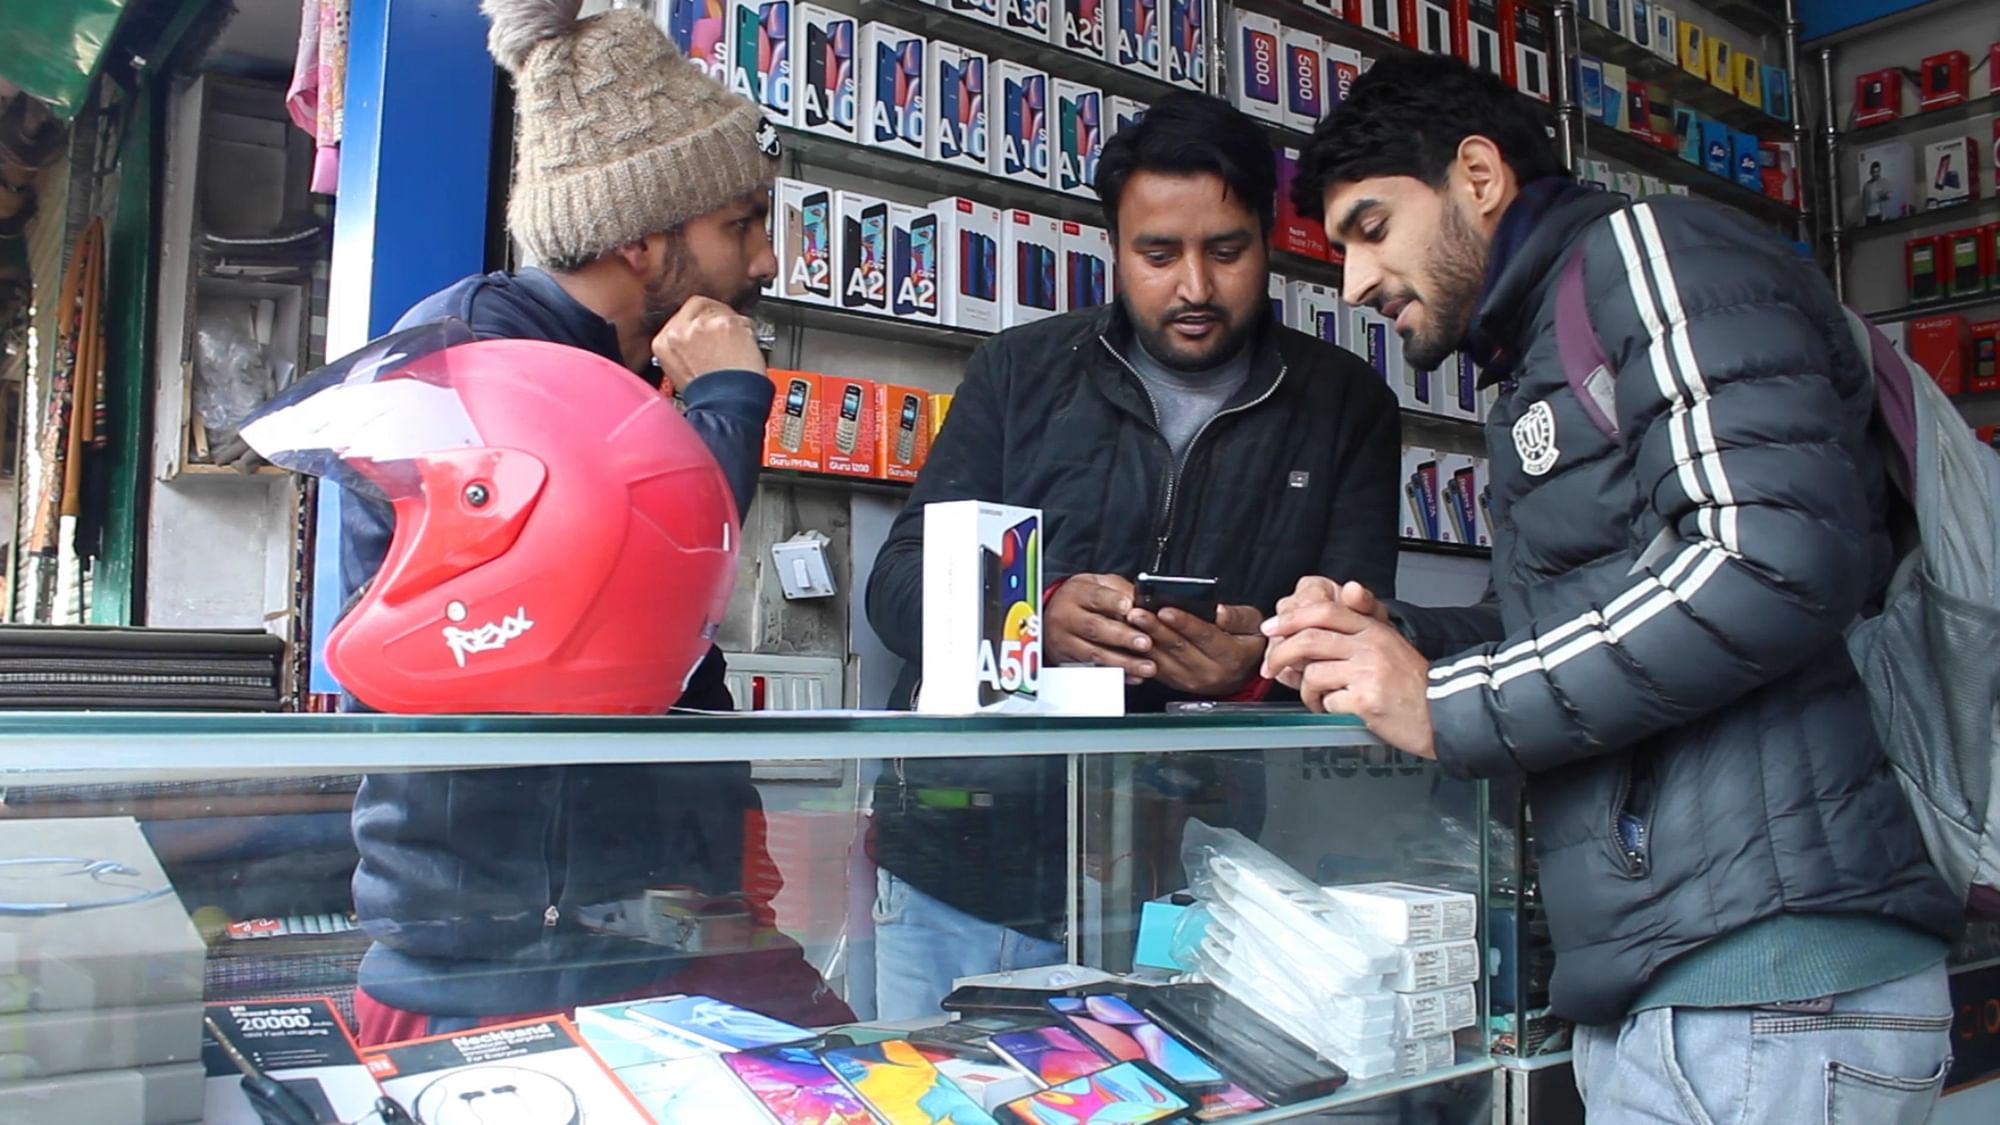 Smartphone sales in Kashmir have dipped due to the internet shutdown in the area.